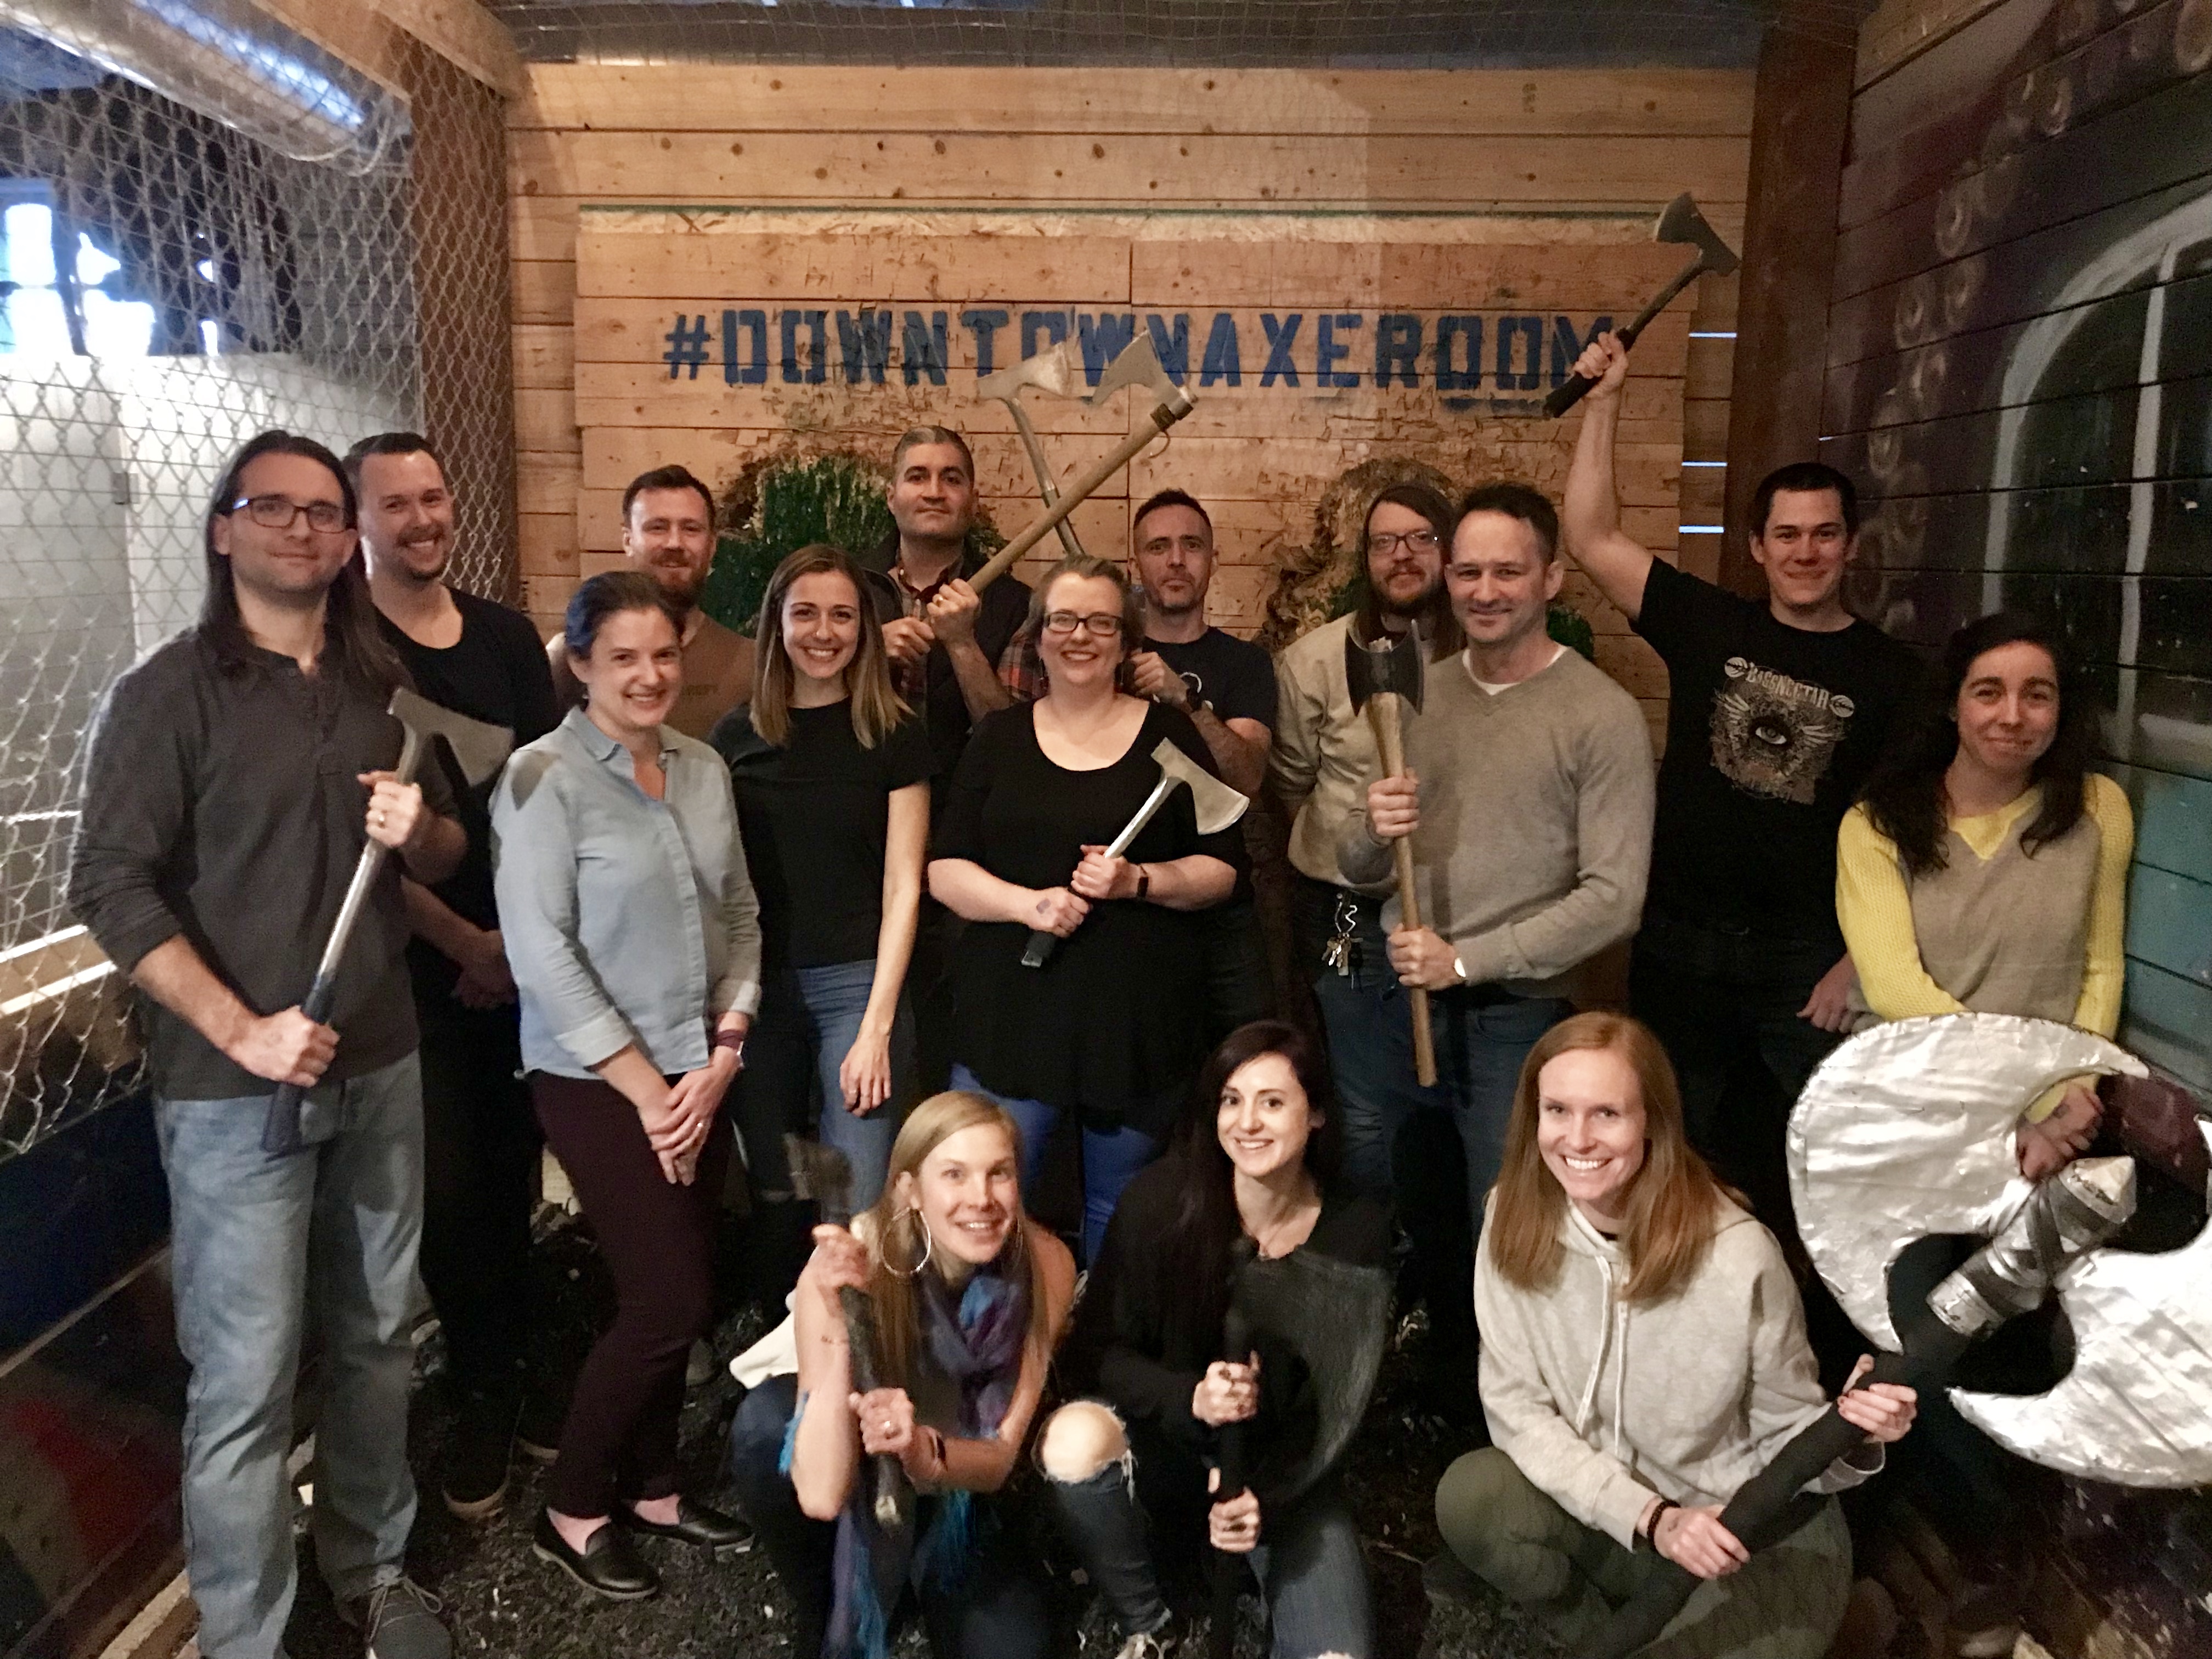 axe throwing with coworkers